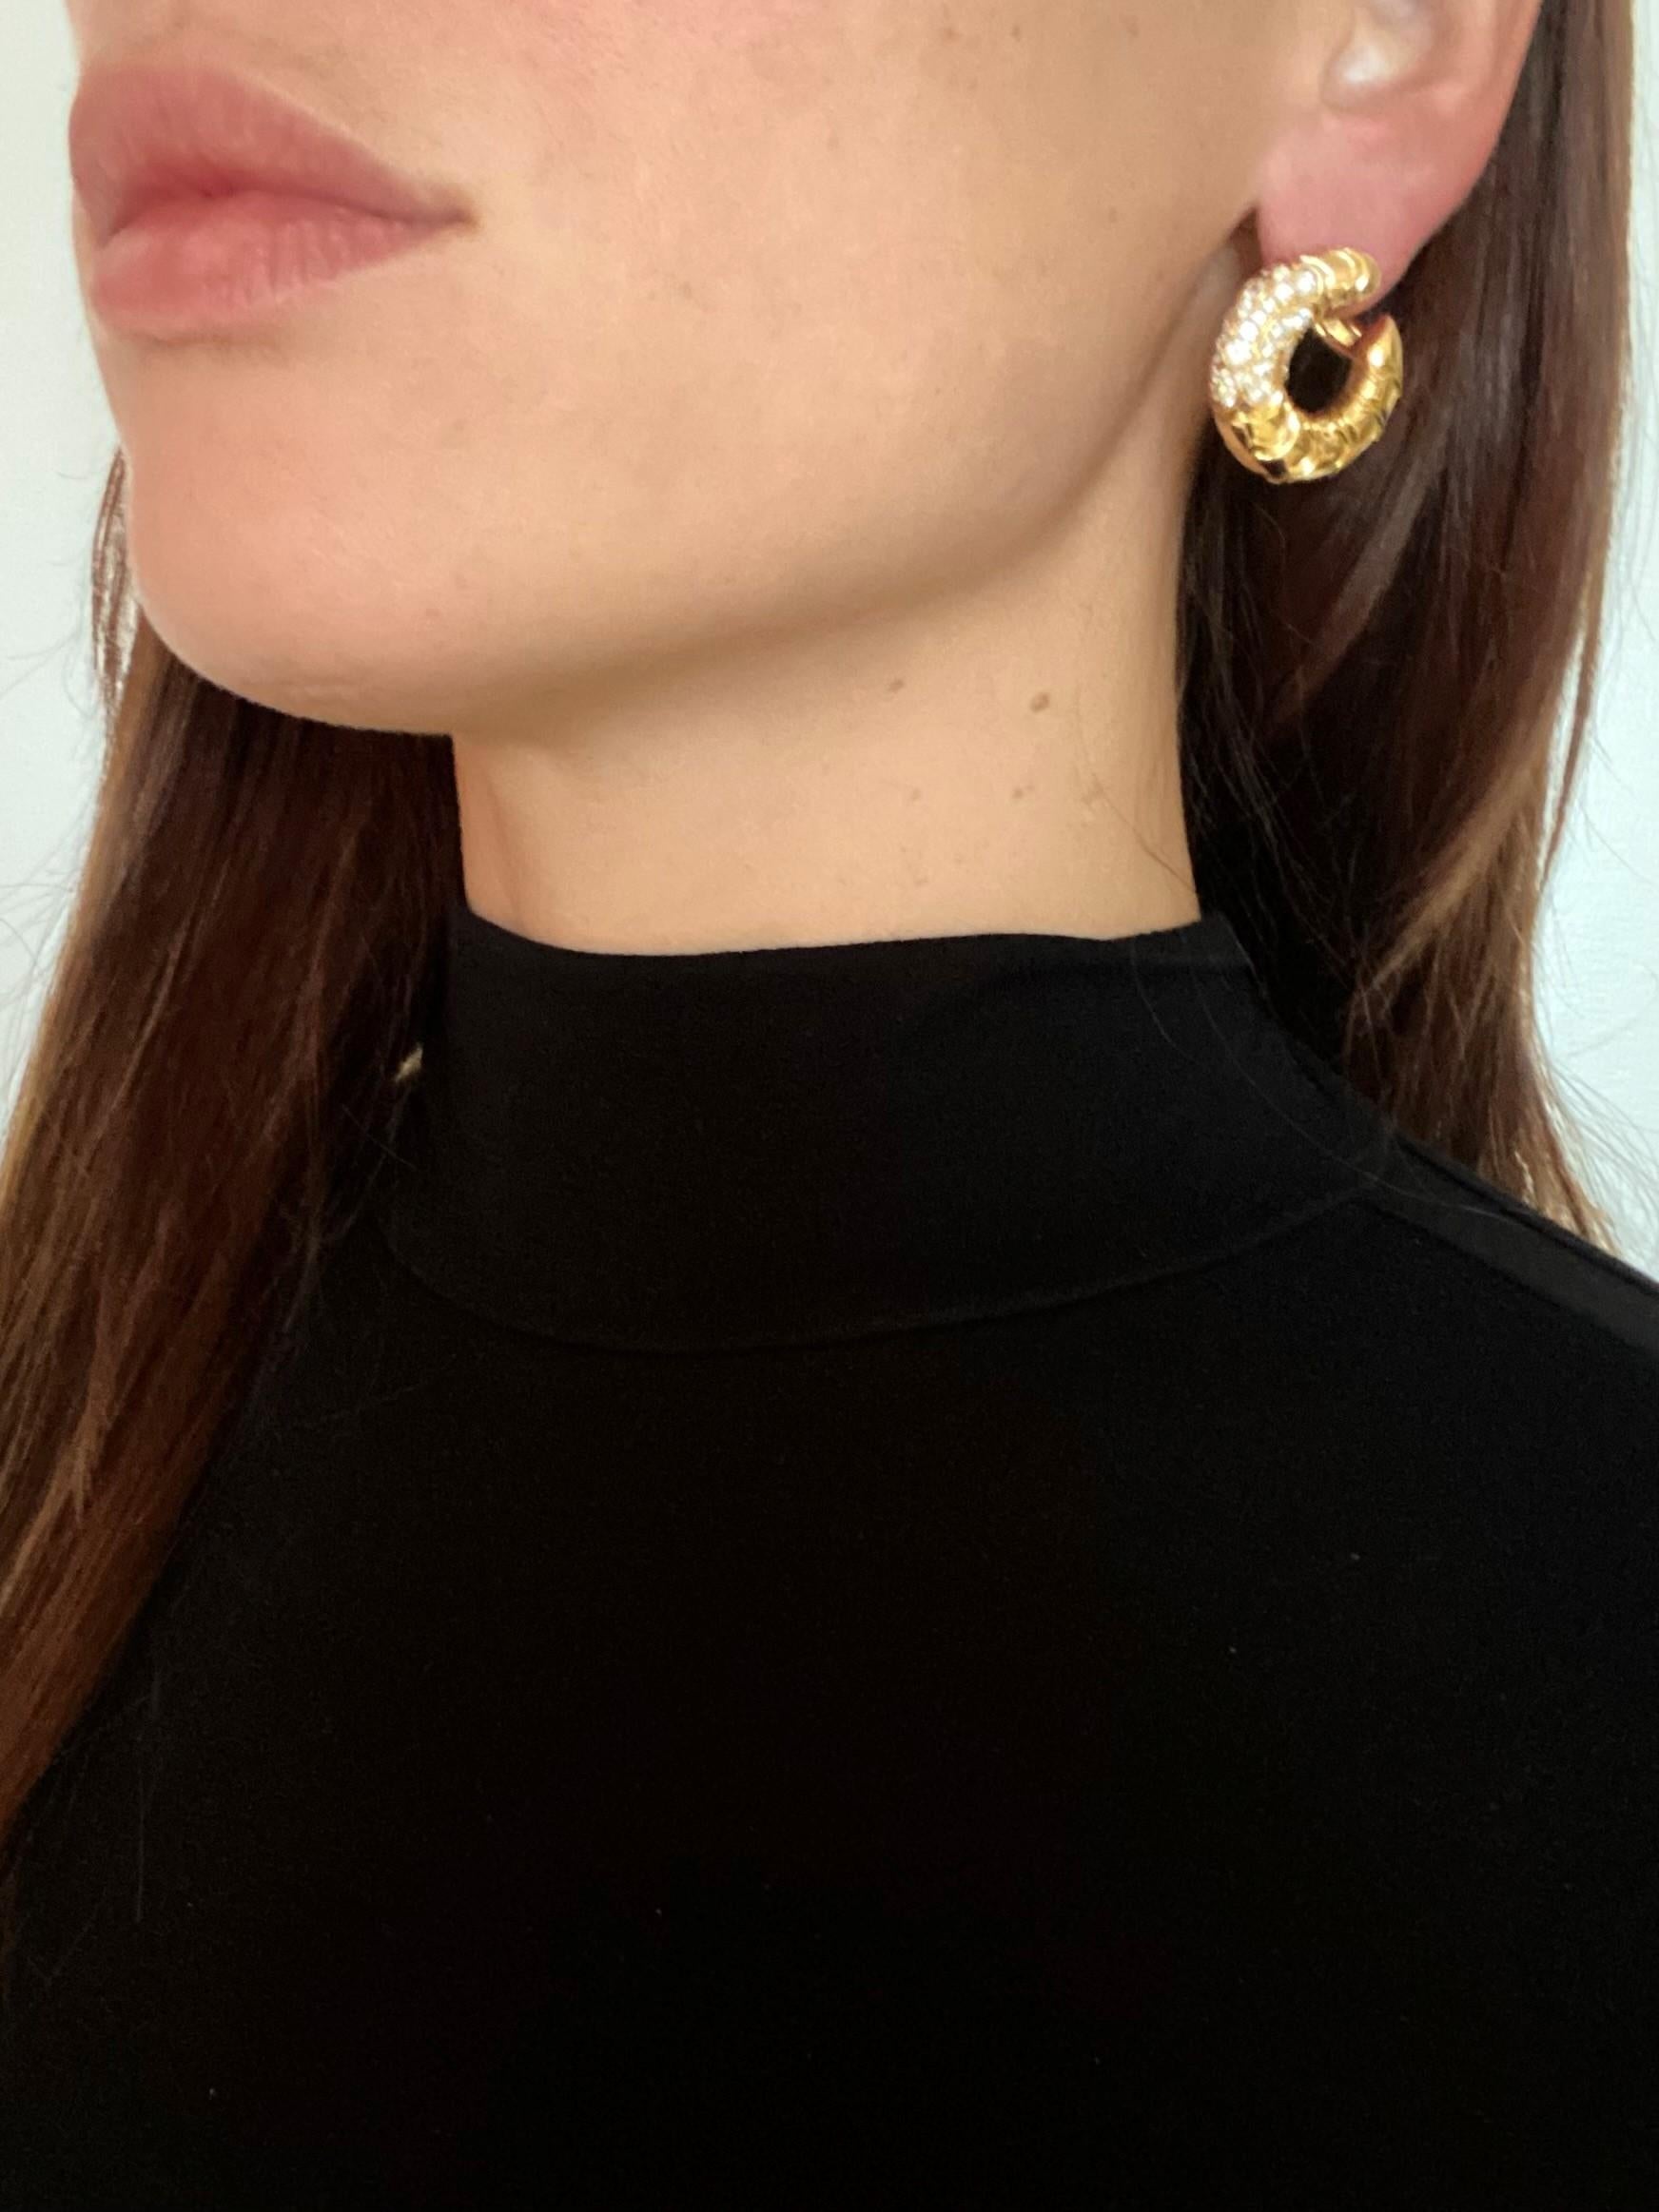 Swirled hoops earrings designed by Marina B.

Beautiful swirl pair created in Milano Italy by the jewelry house of Marina Bvlgari. These very versatile diamonds-set clips-earrings has been crafted with scalloped patterns in solid yellow gold of 18